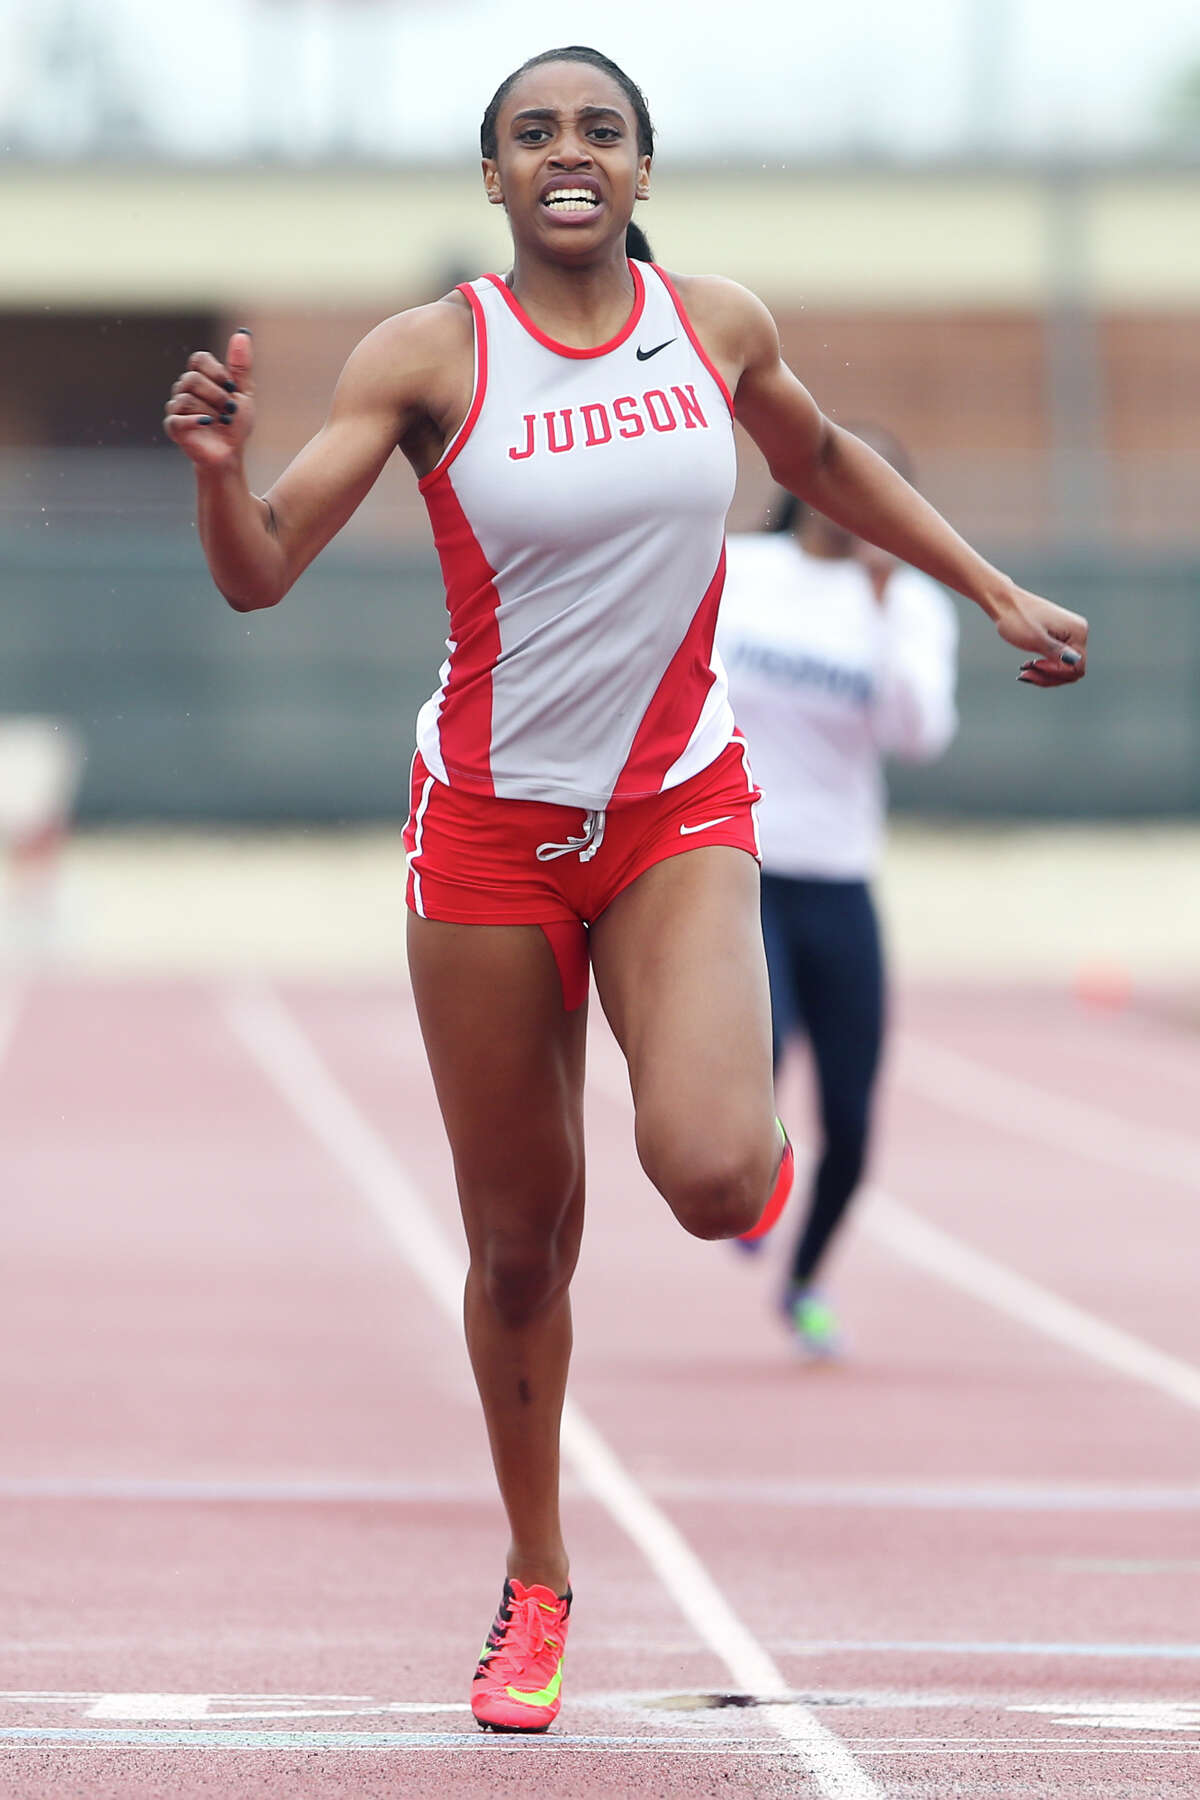 Judson’s Kiana Horton crosses the finish line of the 200-meter dash during Judson’s Ron Faught Invitational at Rutledge Stadium on March 21, 2015. Horton won the event with a time of 23.56 seconds and was named top female athlete of the meet.